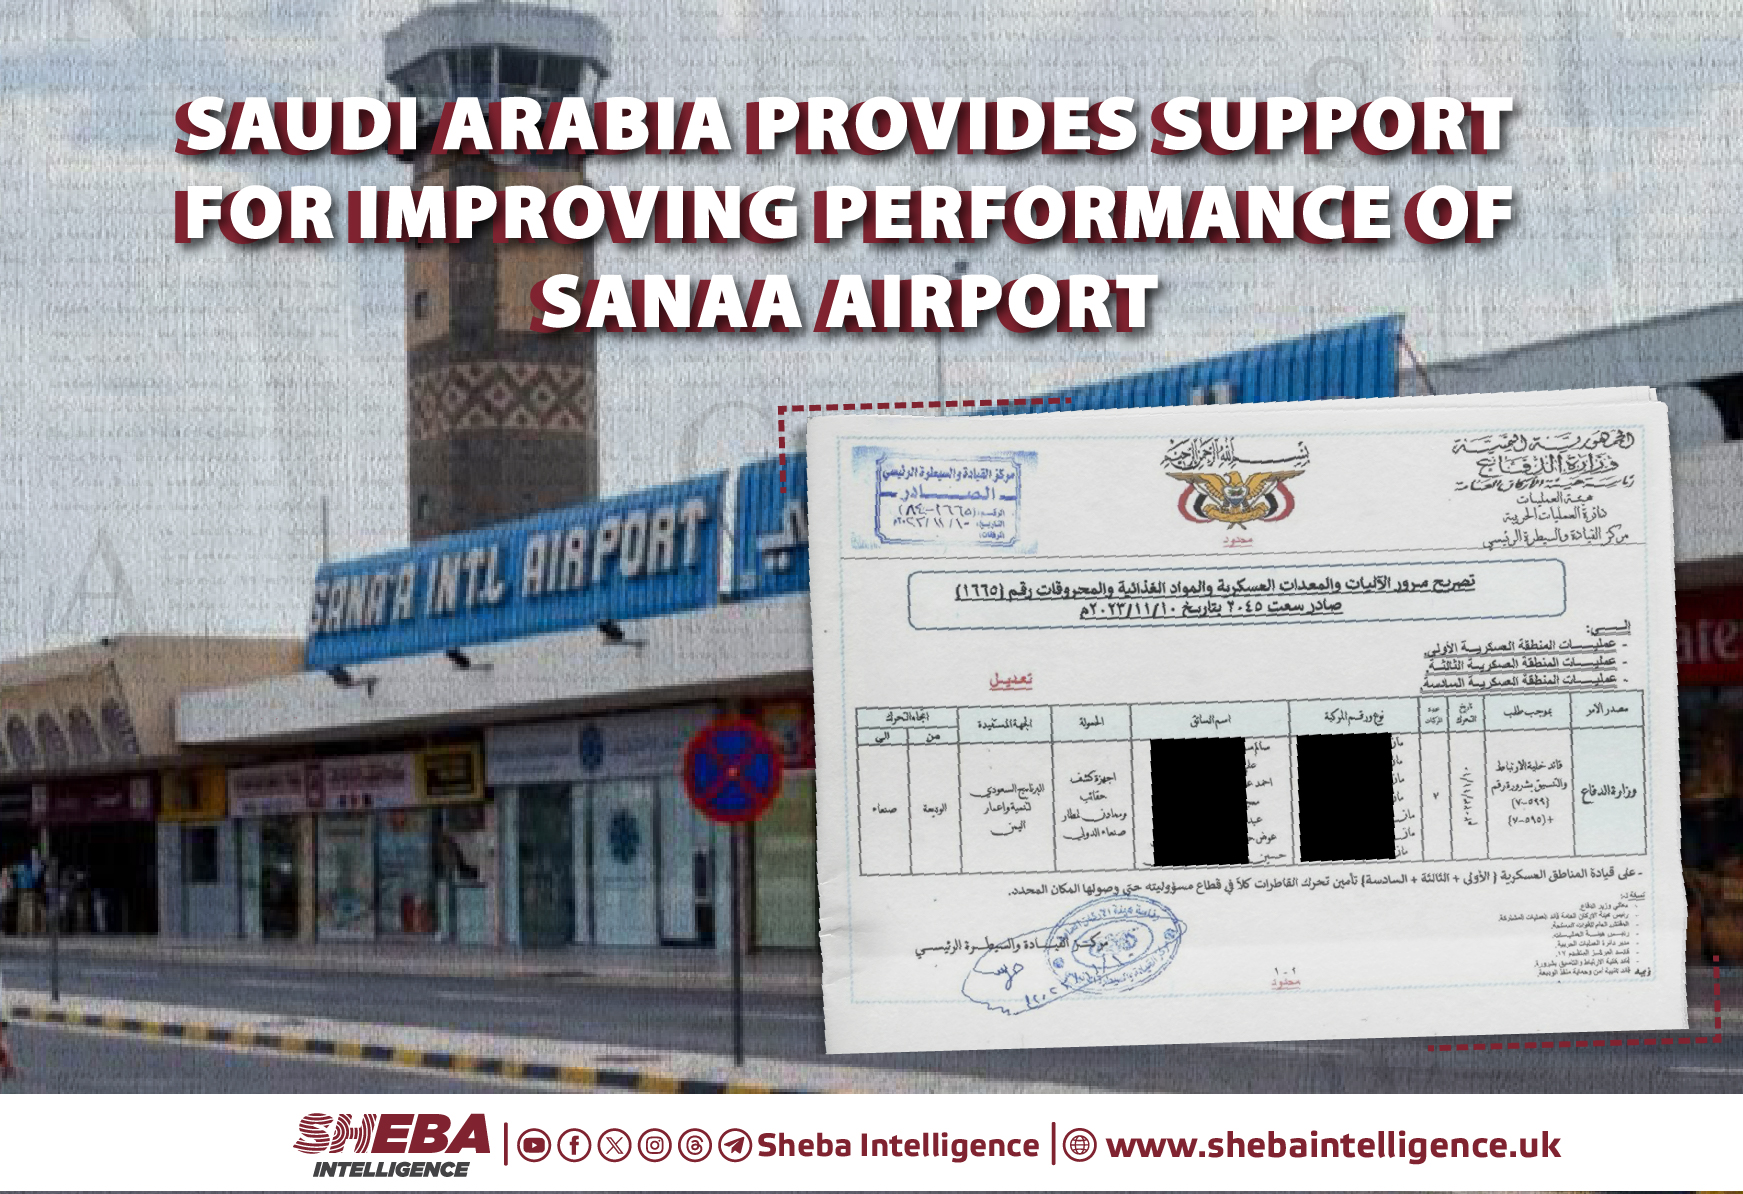 Saudi Arabia Provides Support for Improving Performance of Sanaa Airport